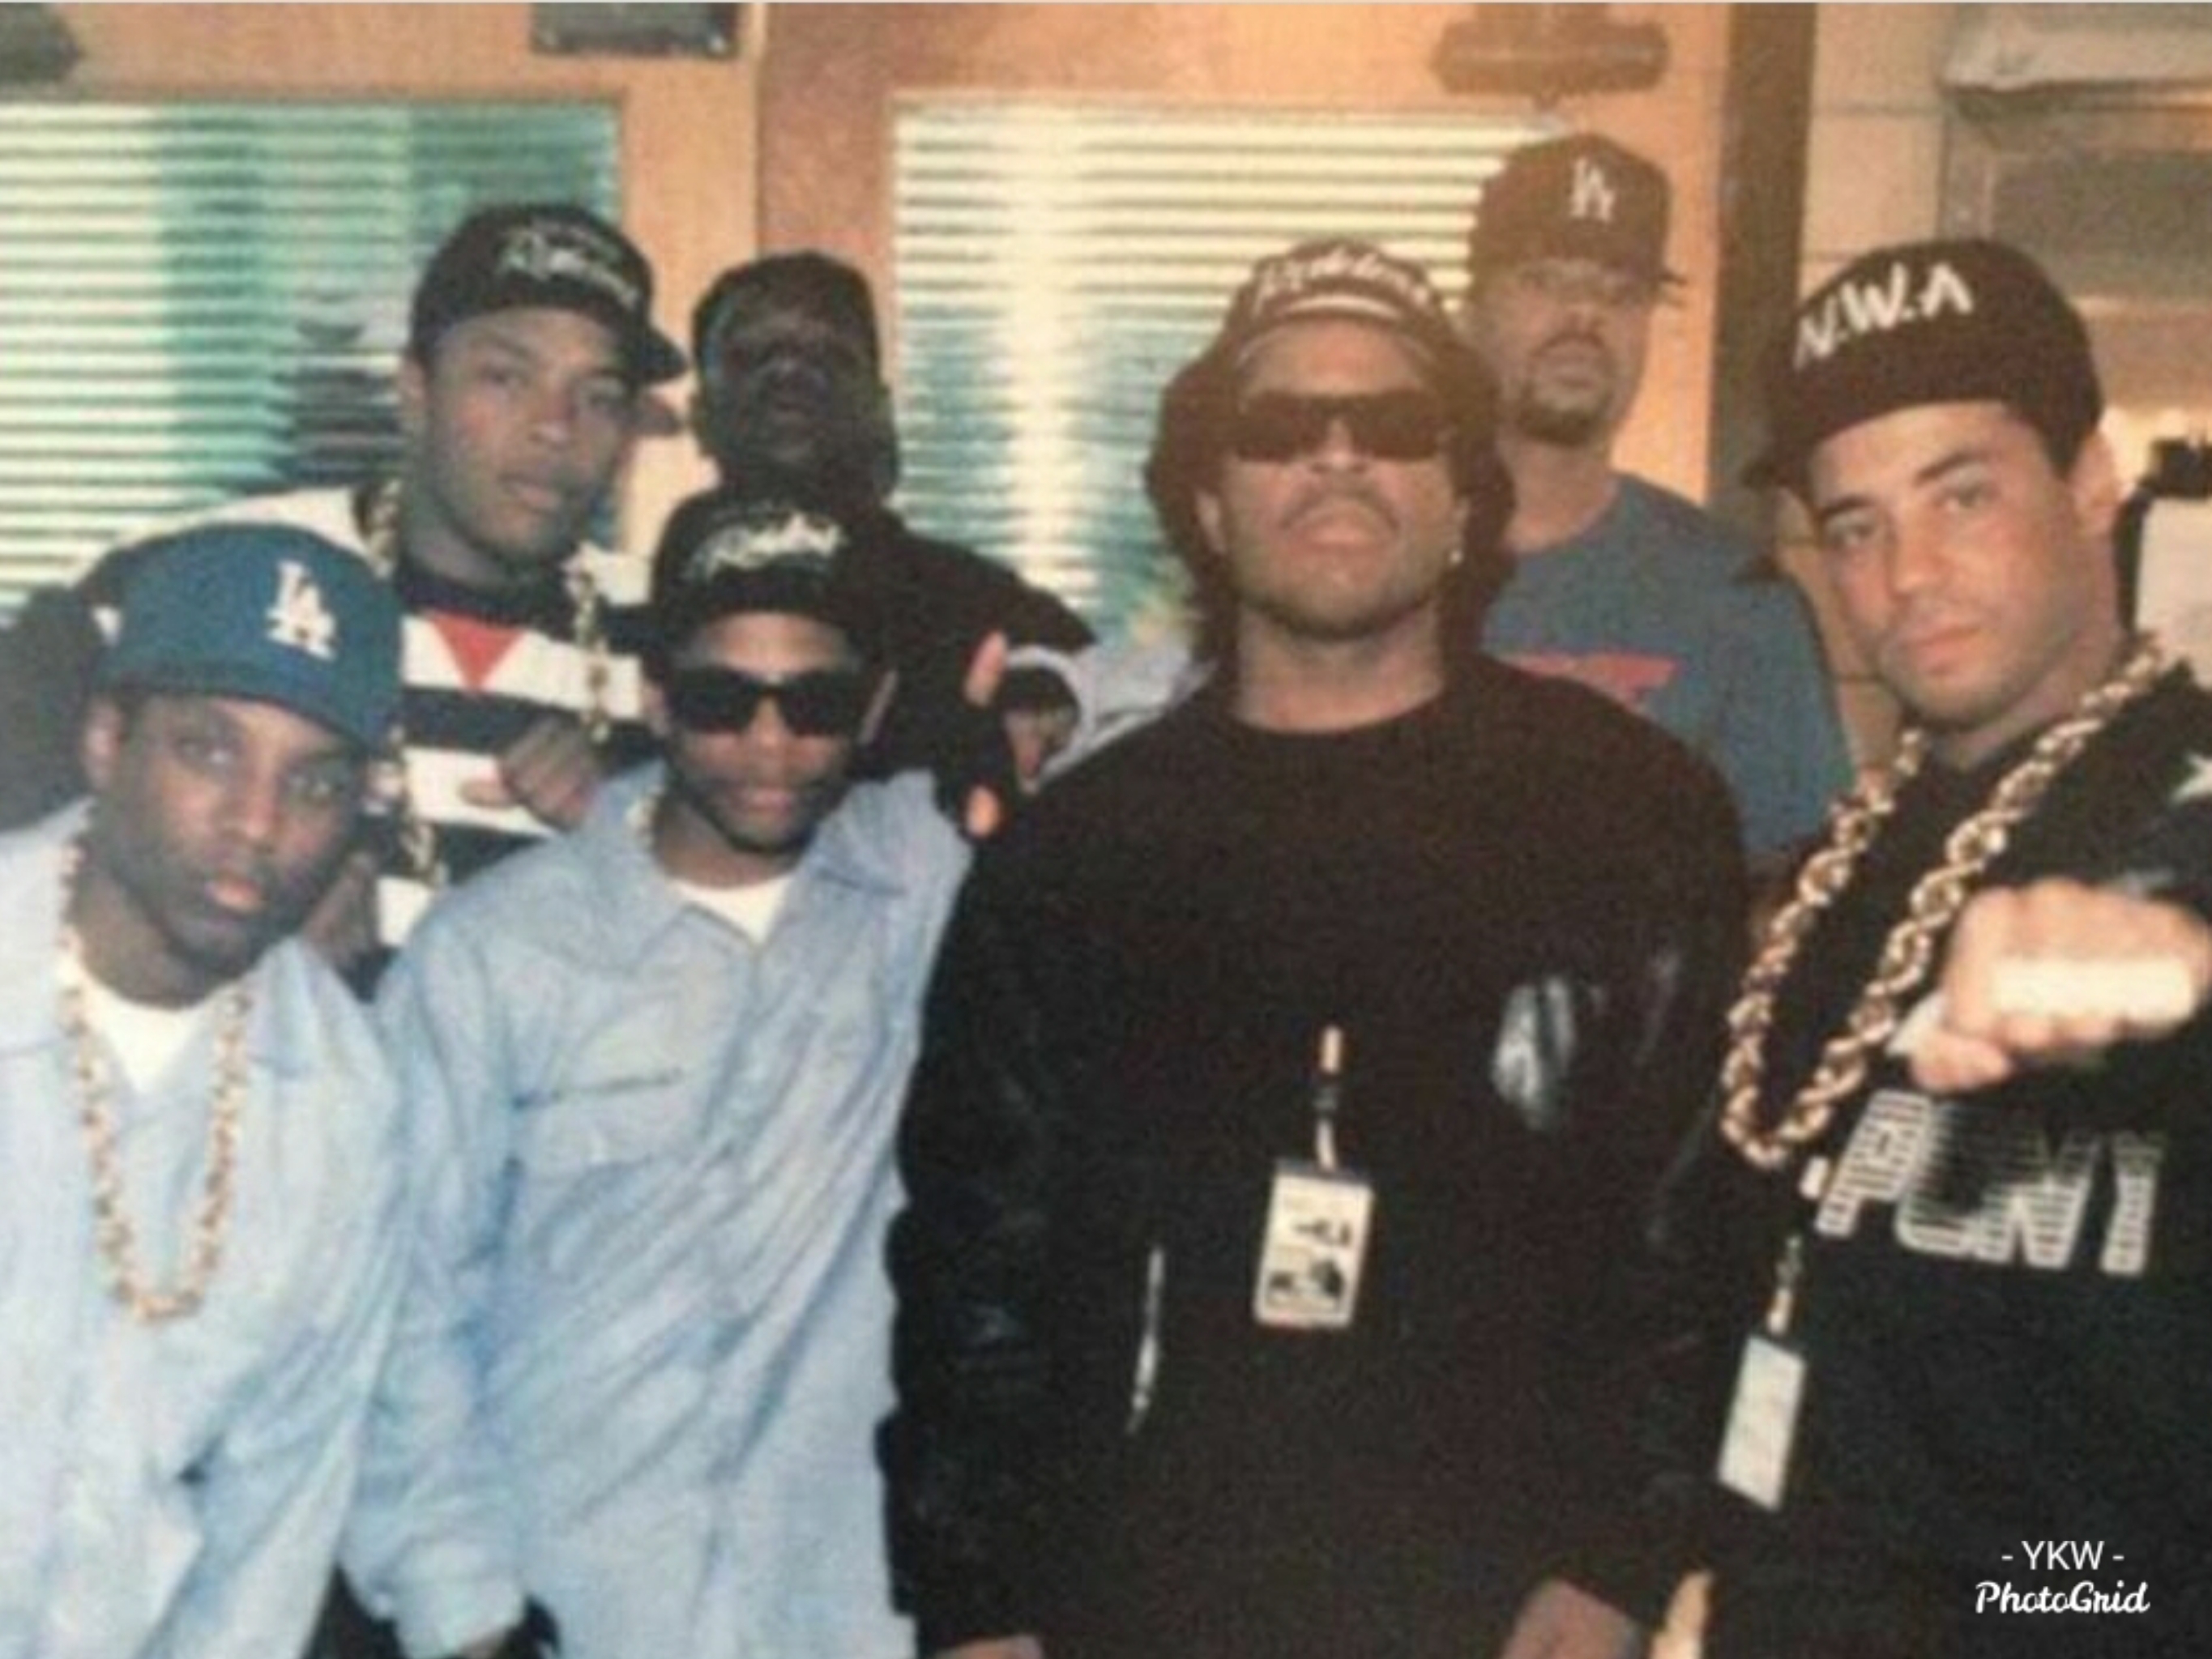 Ice Cube Reveals That NWA Was Not Allowed Into Their Own Listening Party